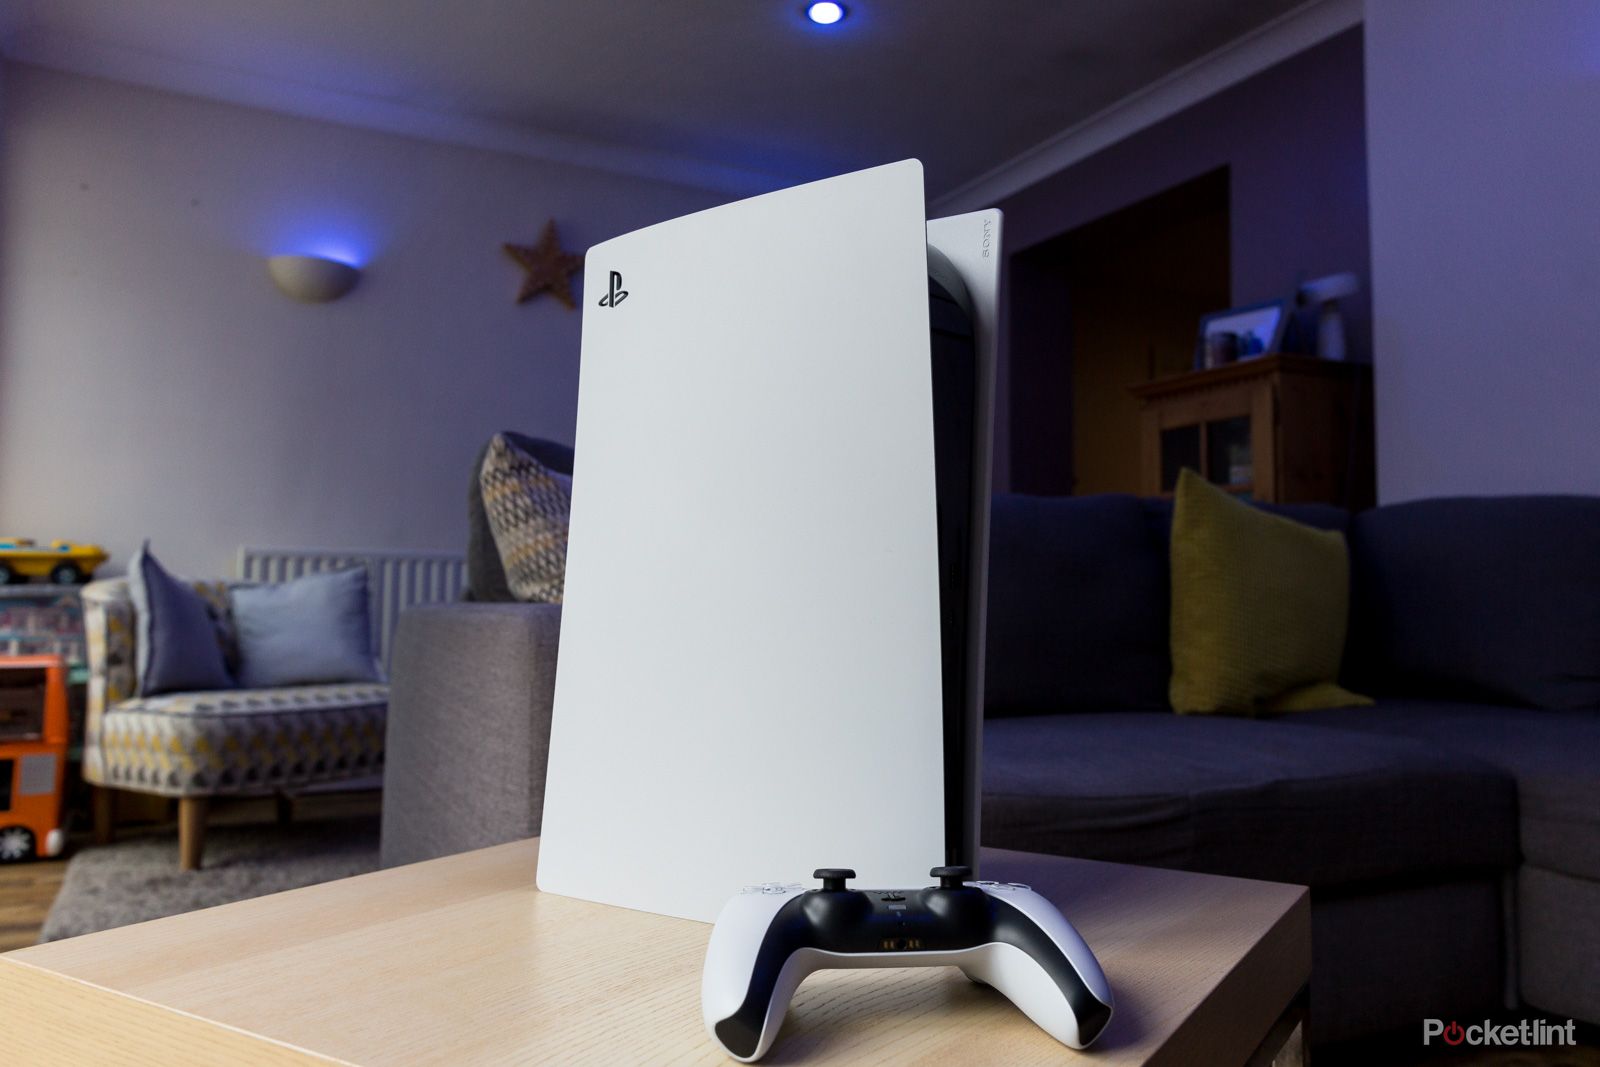 PS5 stood vertically on a table